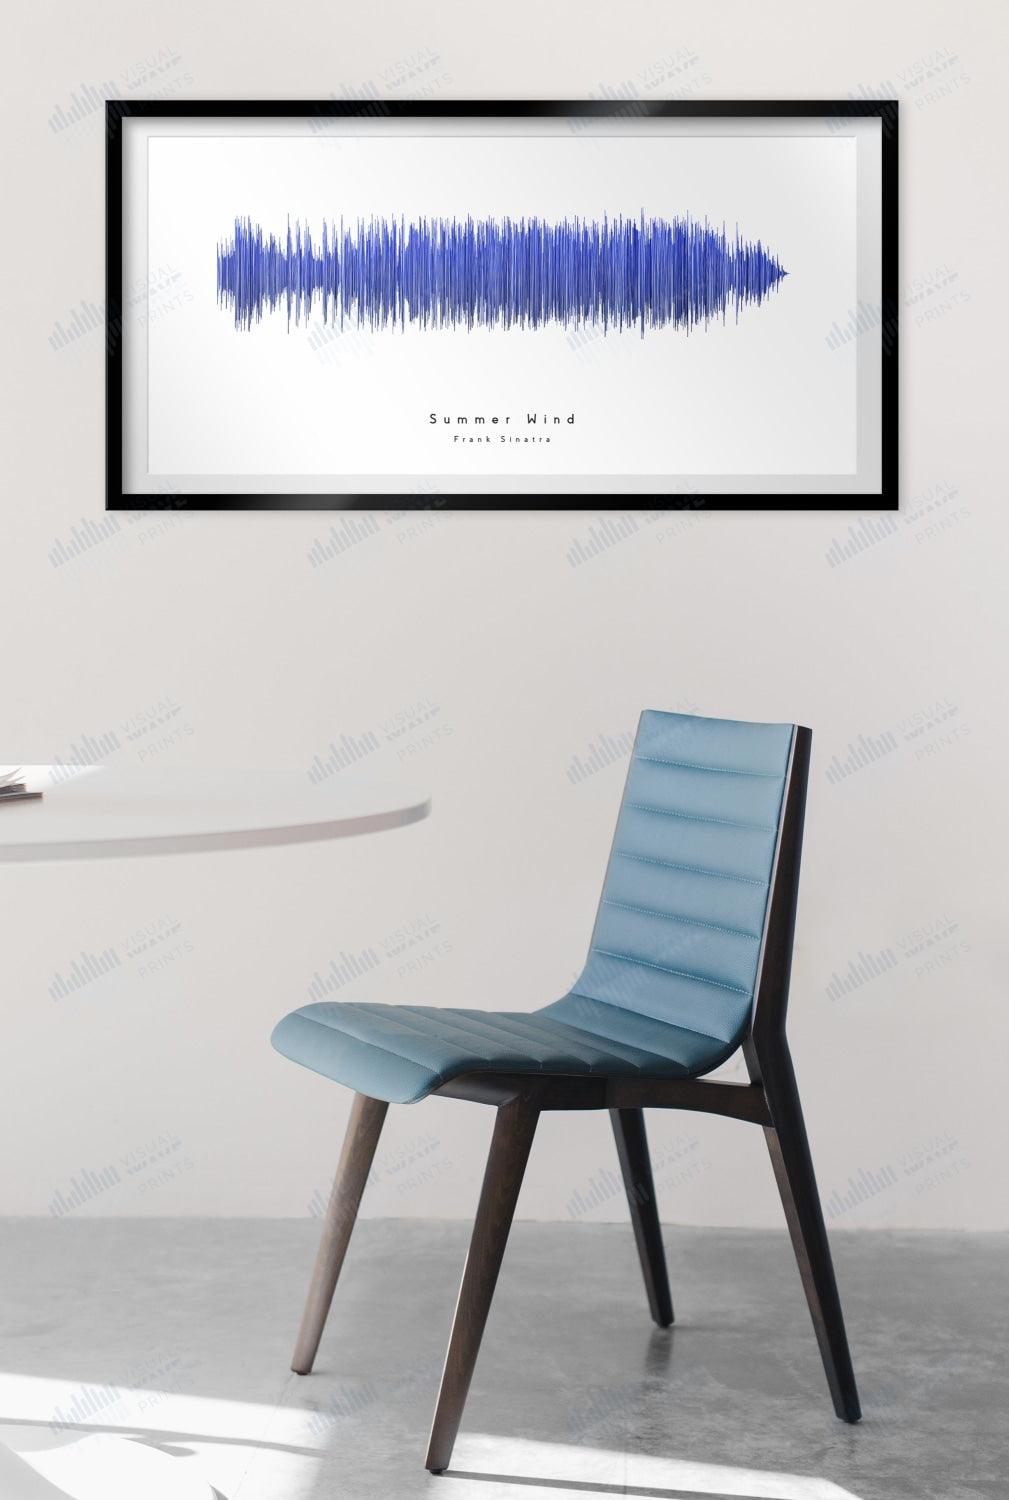 Summer Wind by Frank Sinatra - Visual Wave Prints